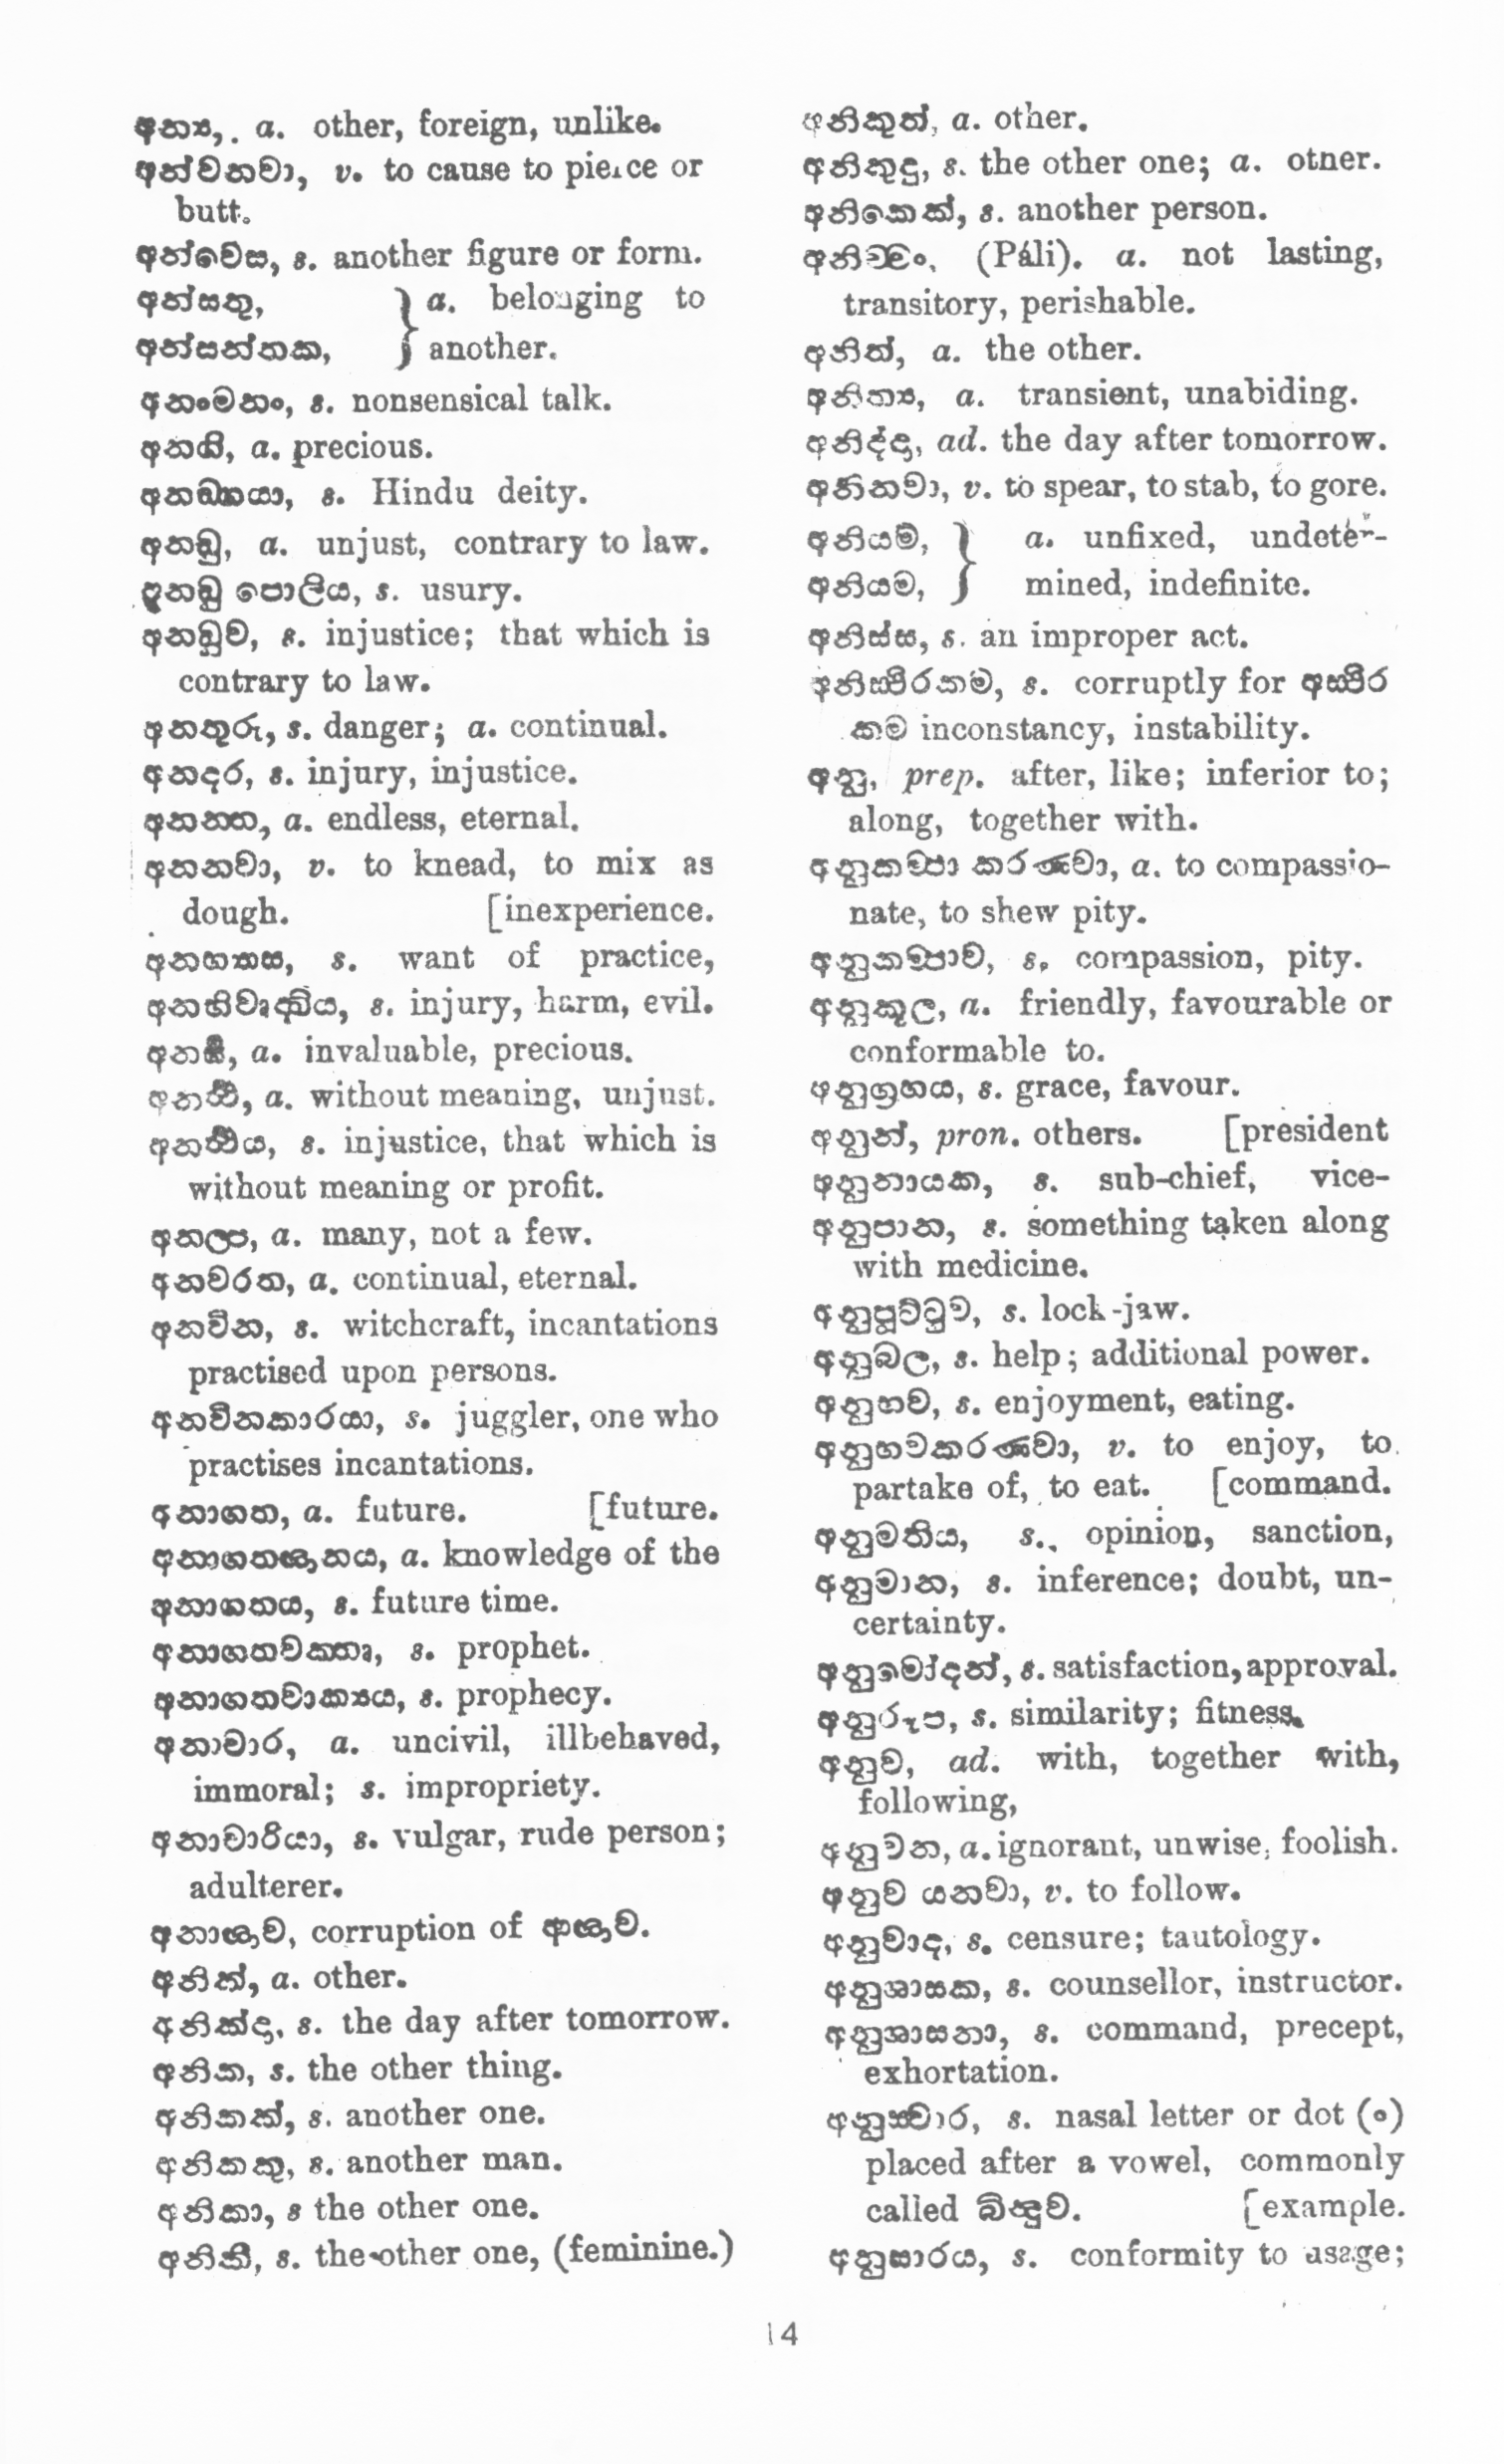 Sinhalese-English and English-Sinhalese Dictionary